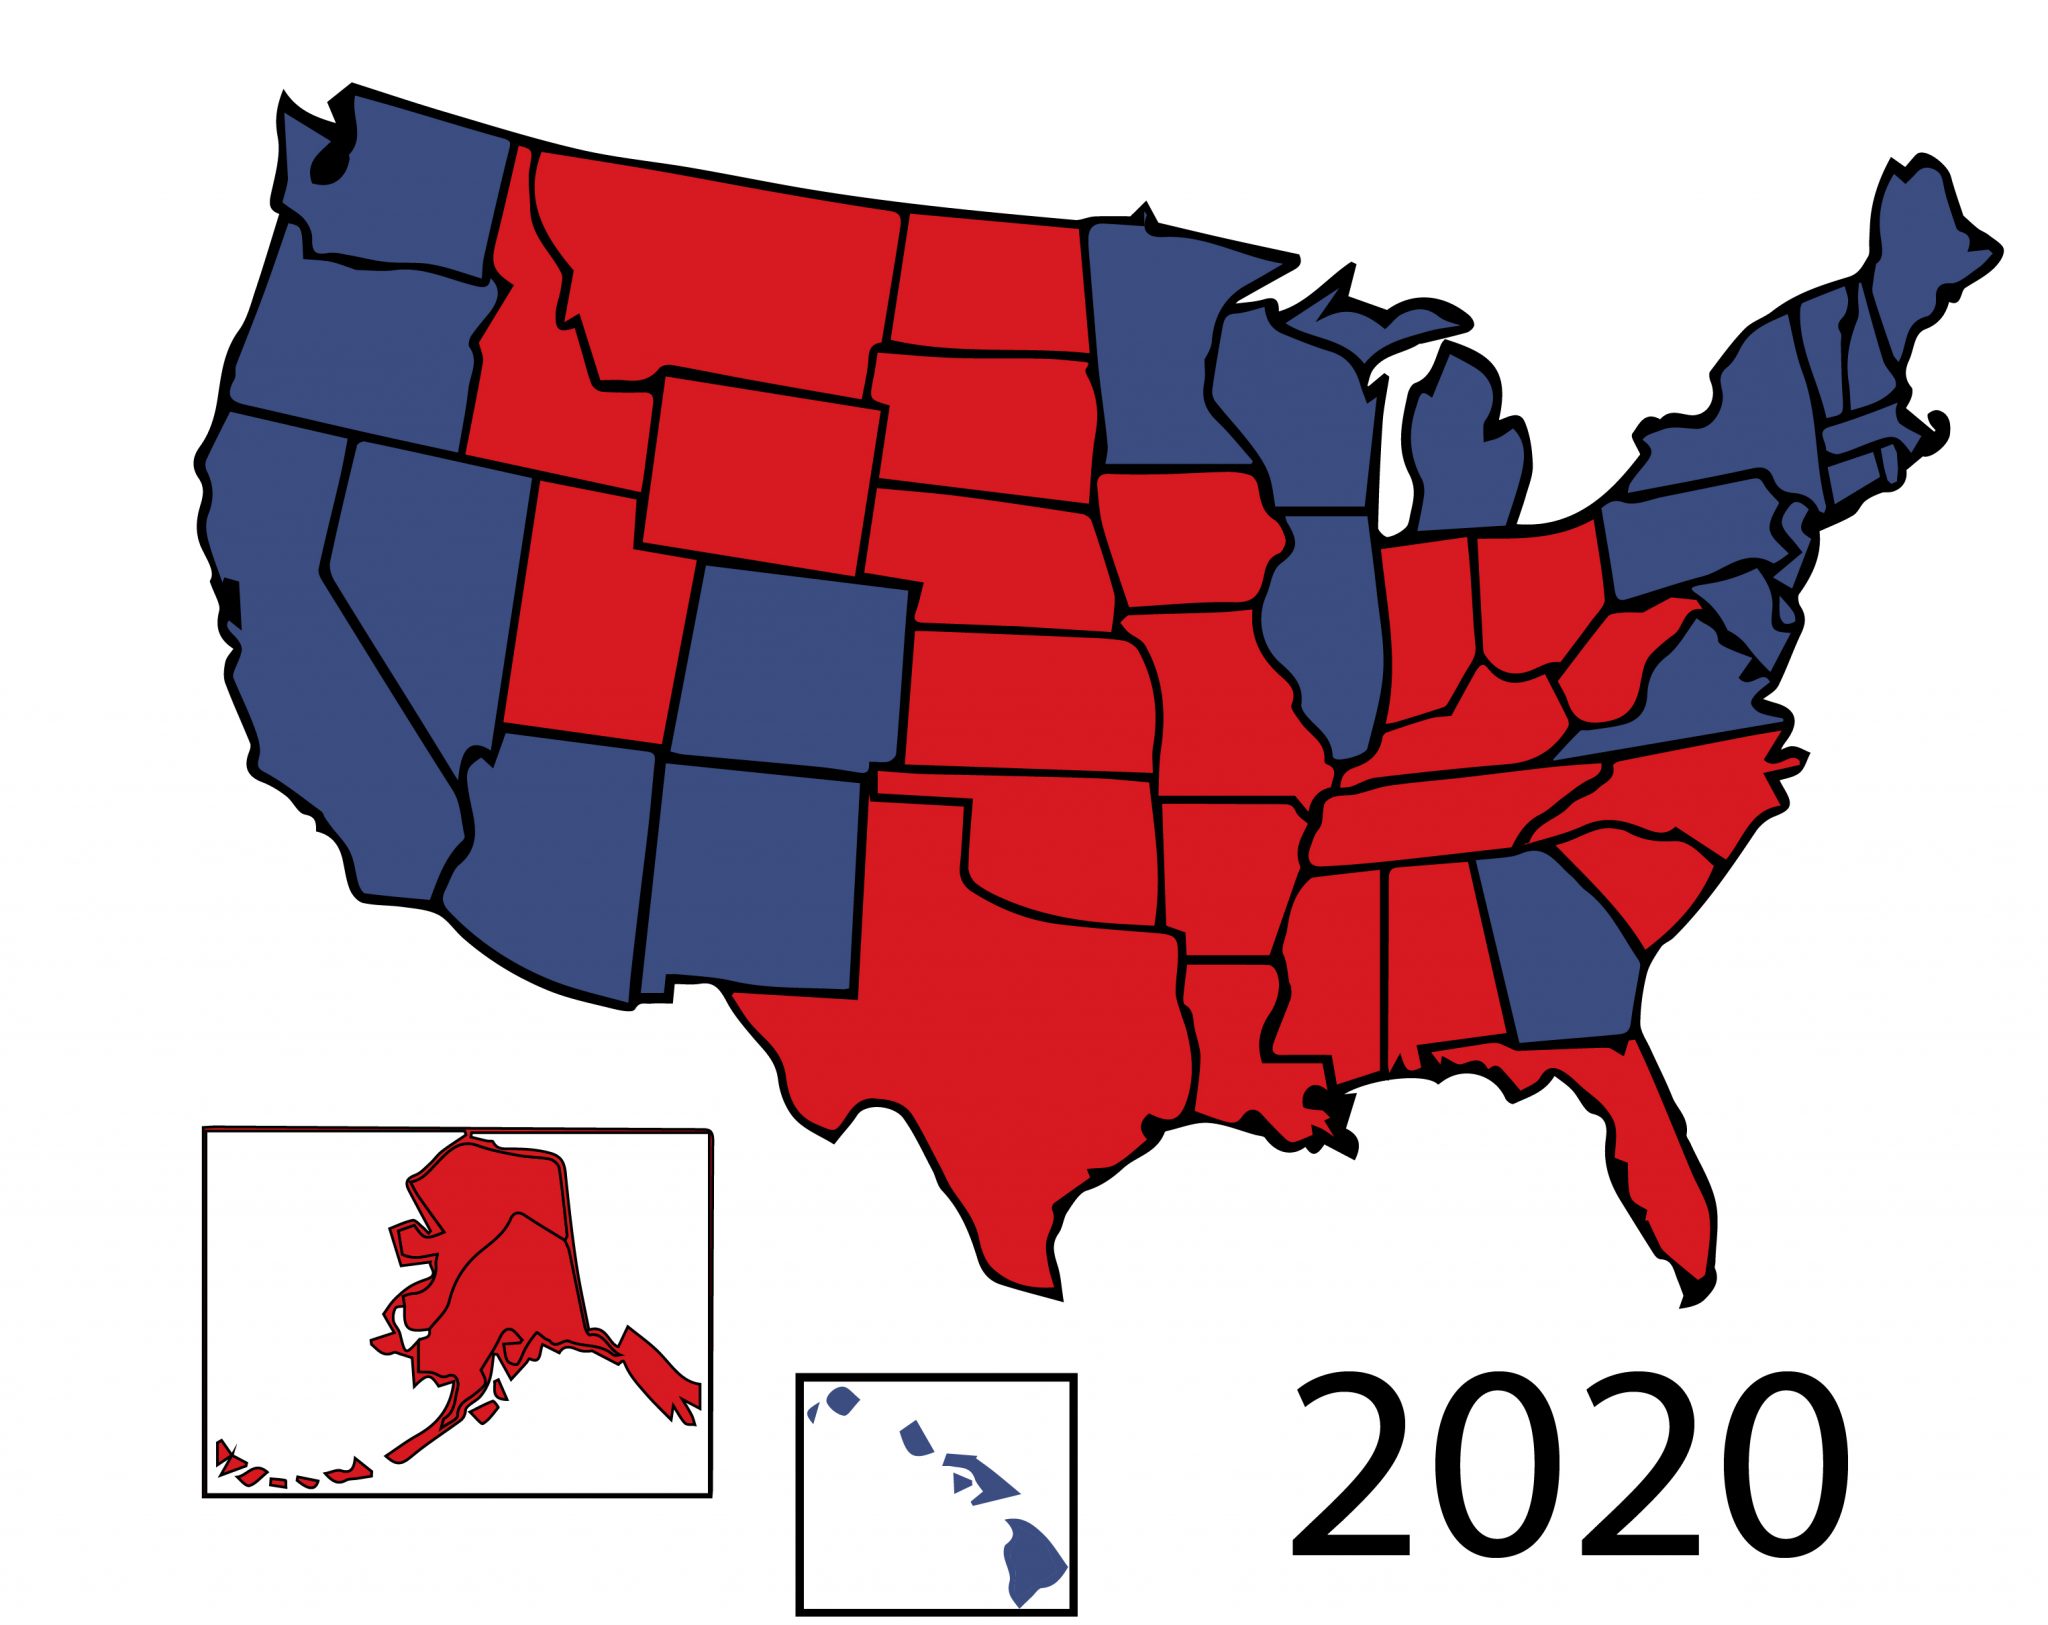 2020 General Presidential electoral map of 50 United States colored in Republican Red, Democrat Blue.